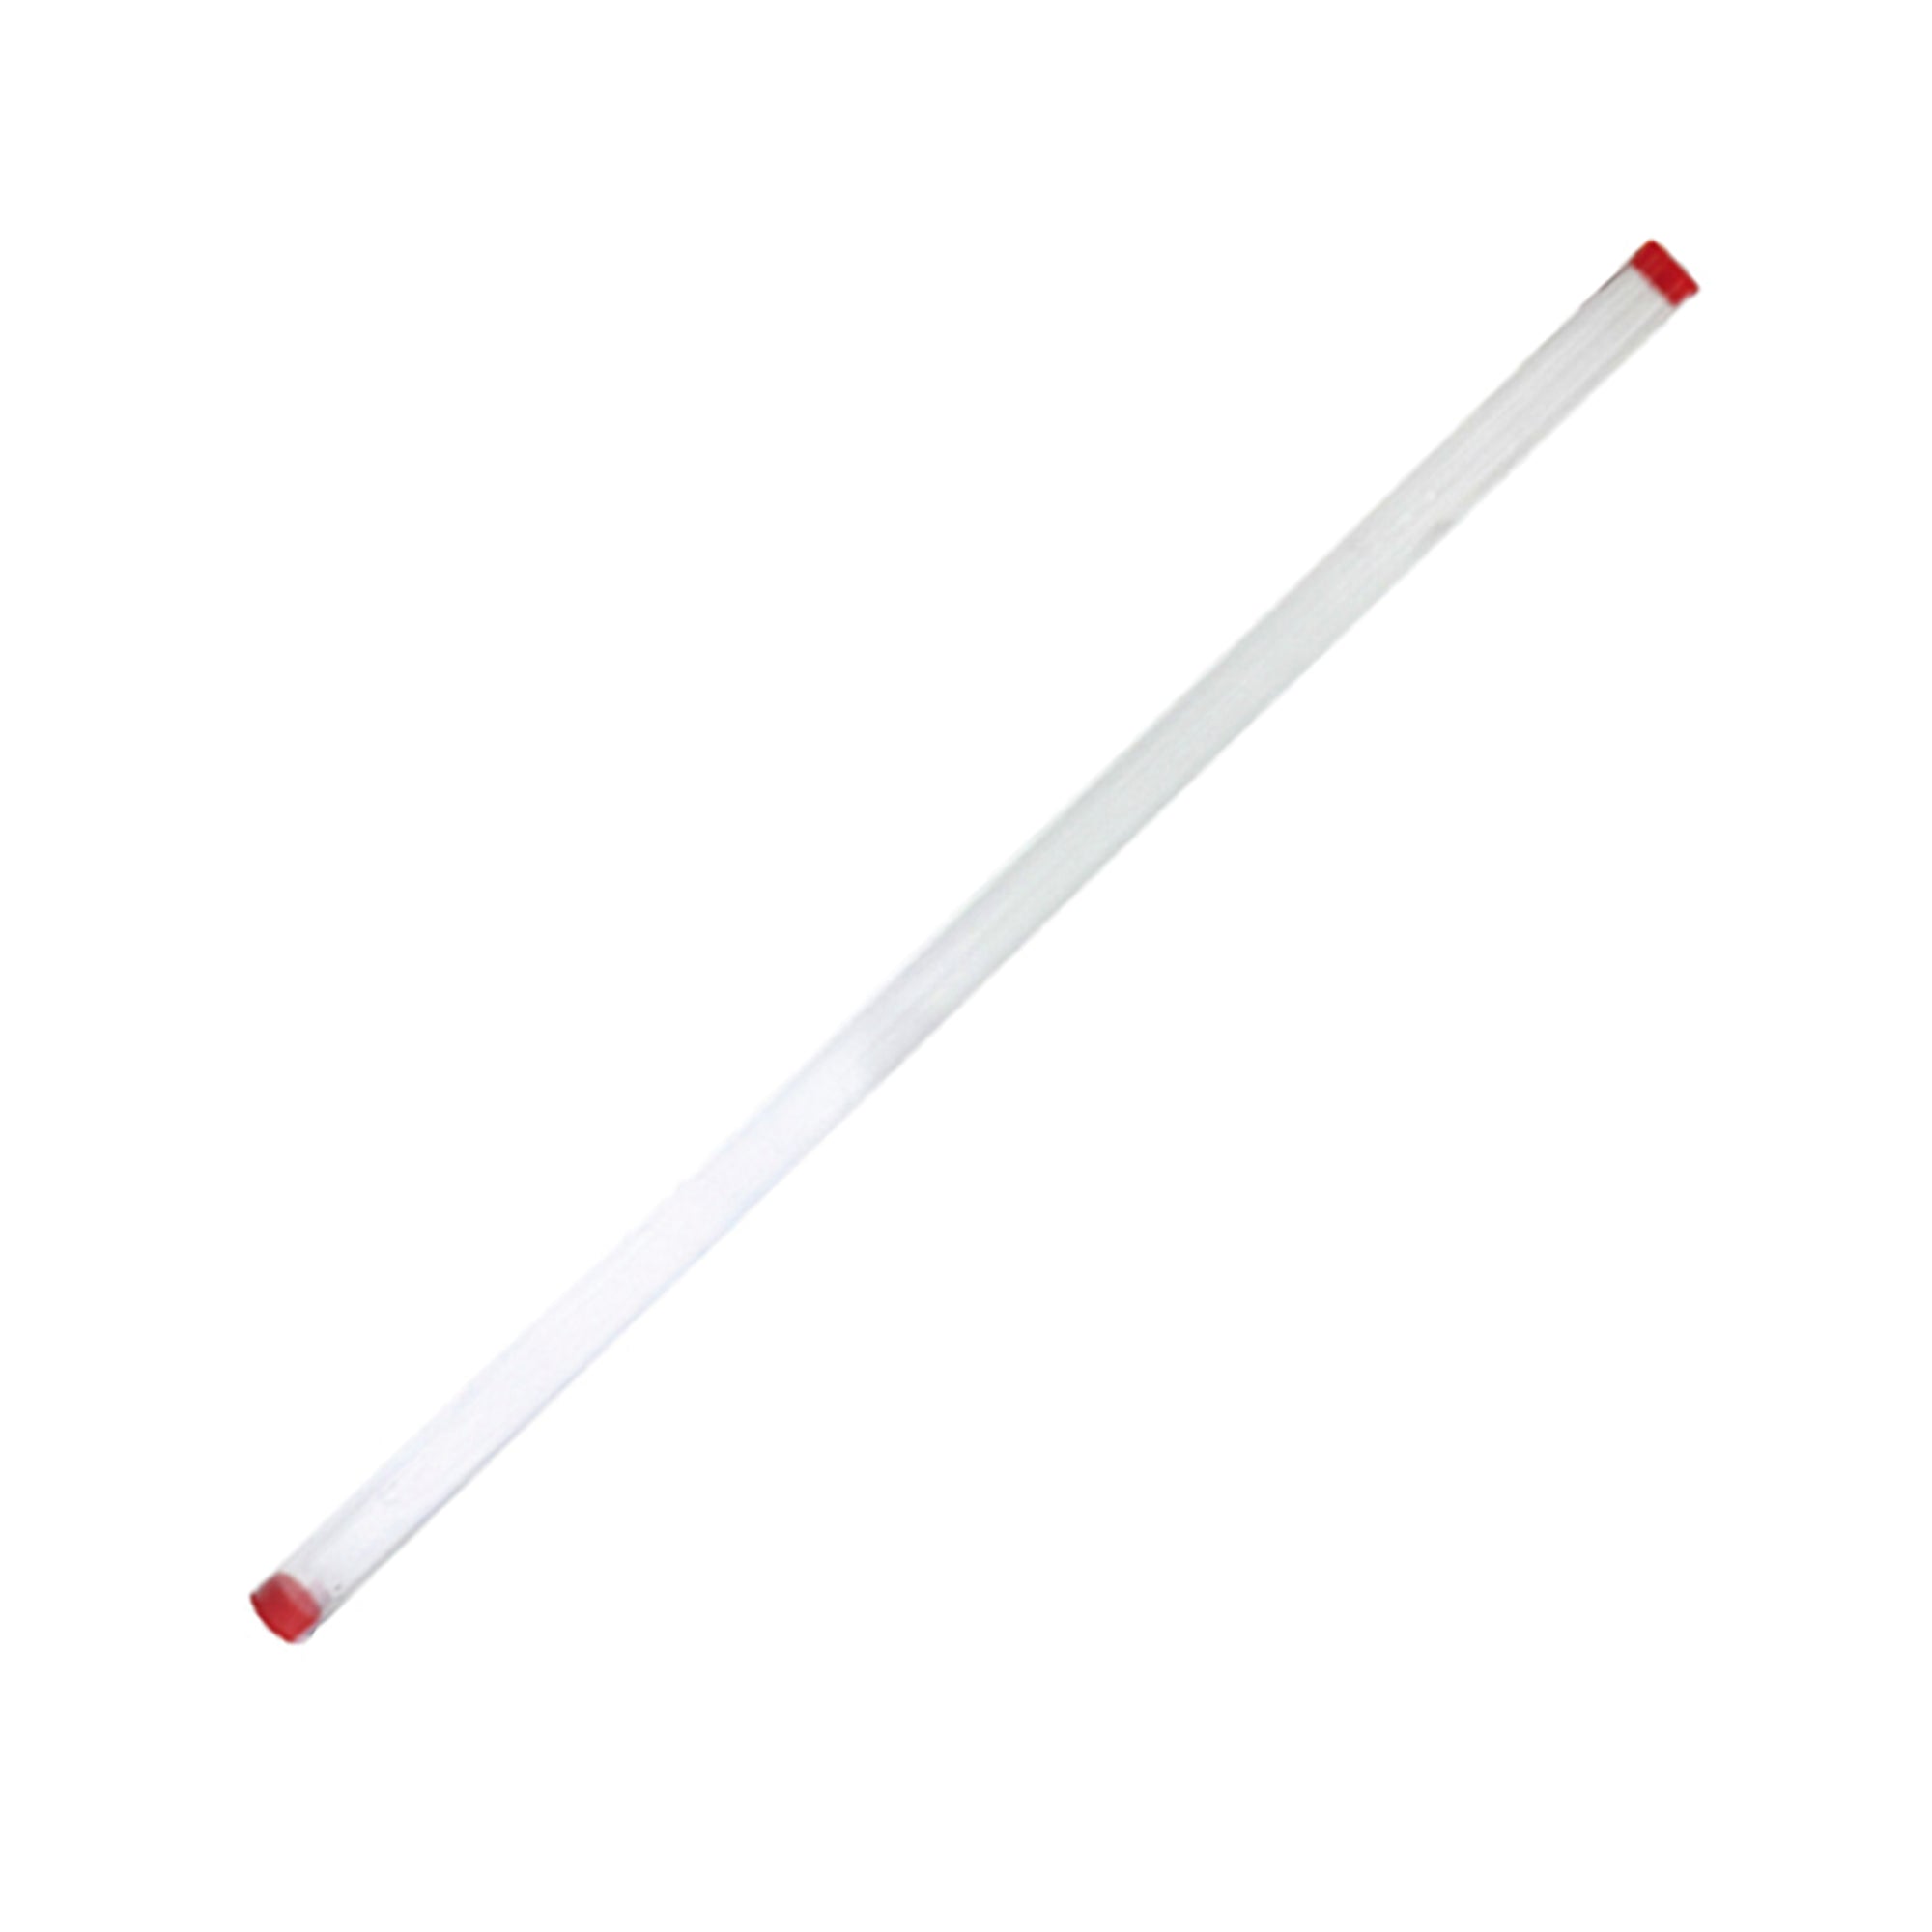 Clear acrylic specimen tube with red end caps